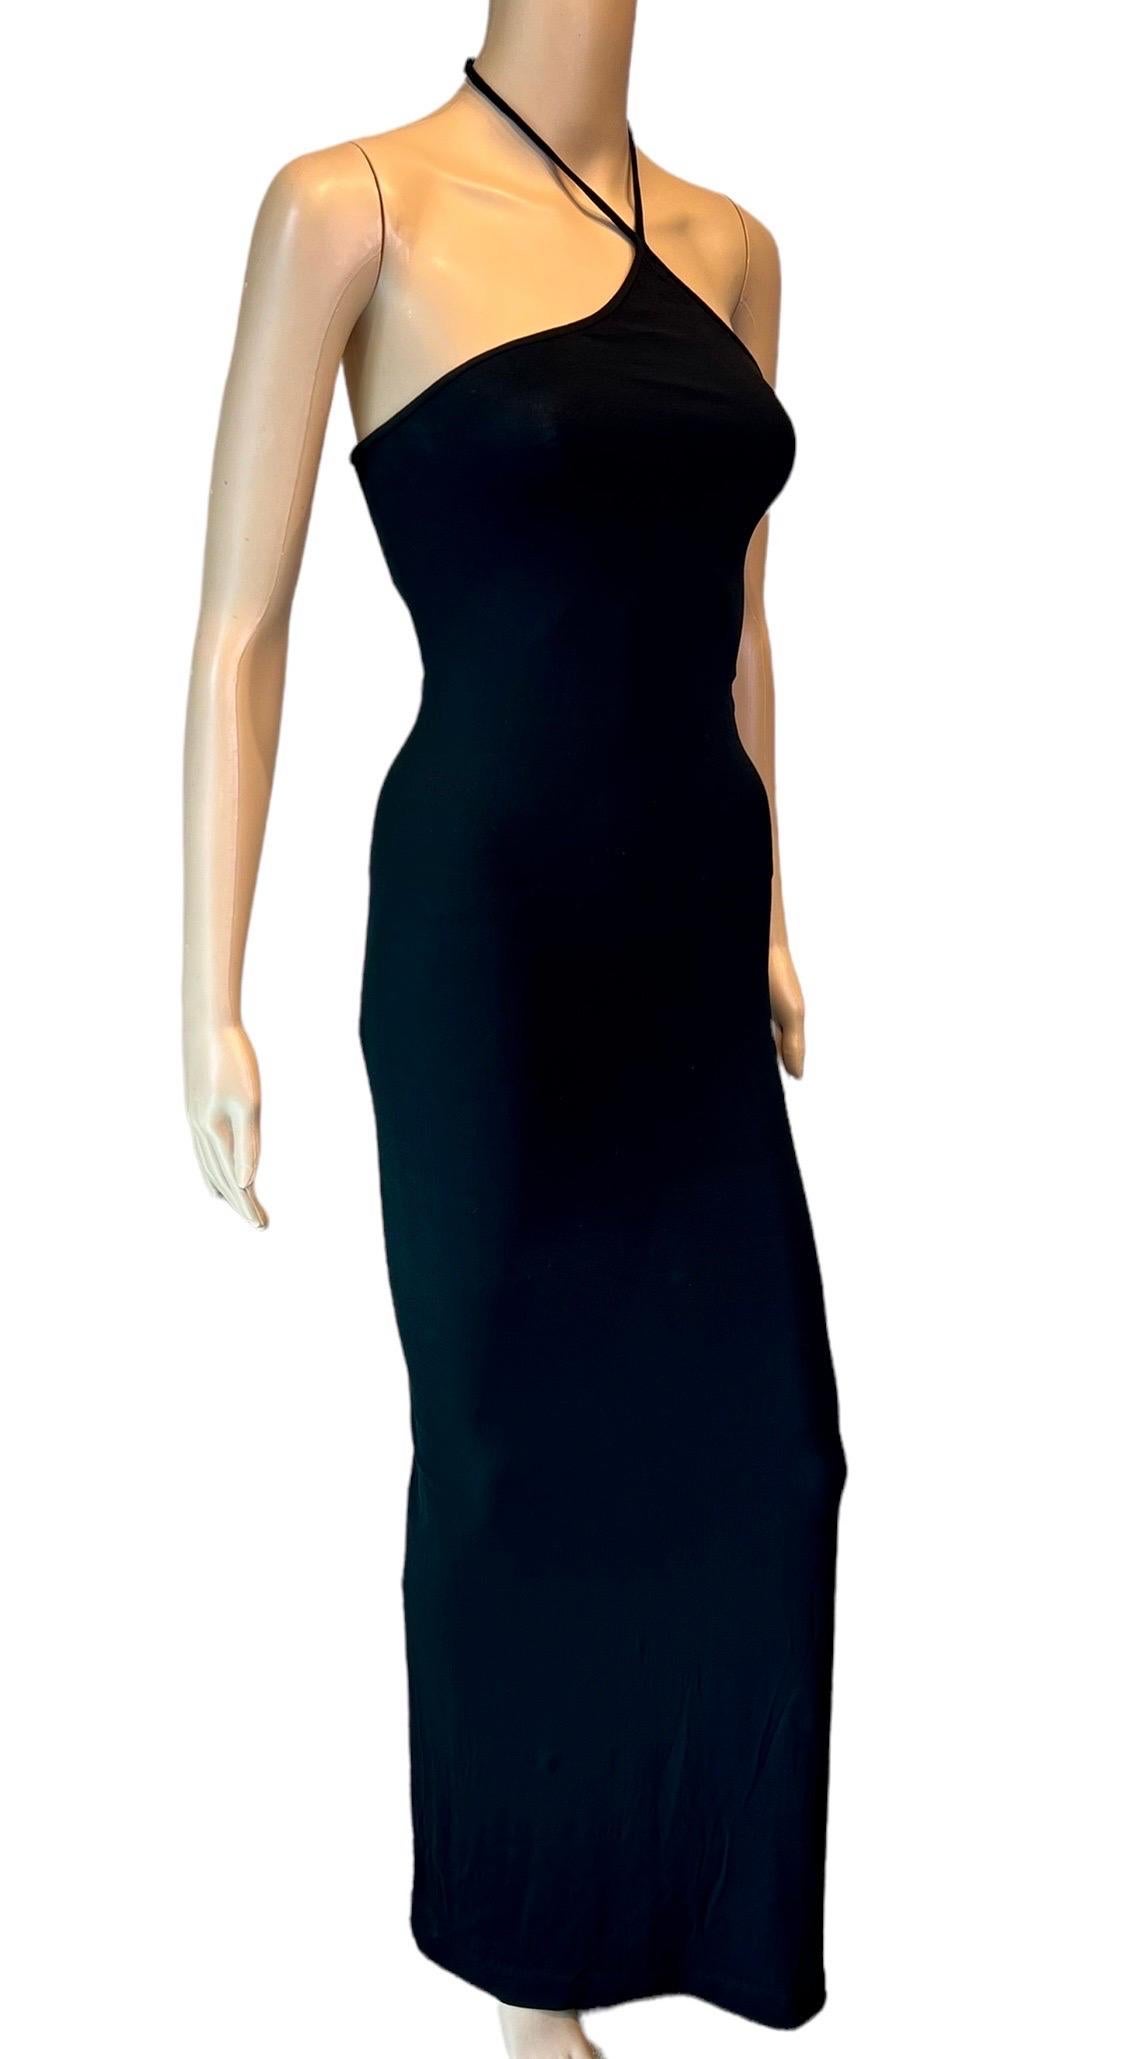 Tom Ford for Gucci F/W 1997 Asymmetrical Halter Bodycon Black Evening Dress Gown For Sale 1